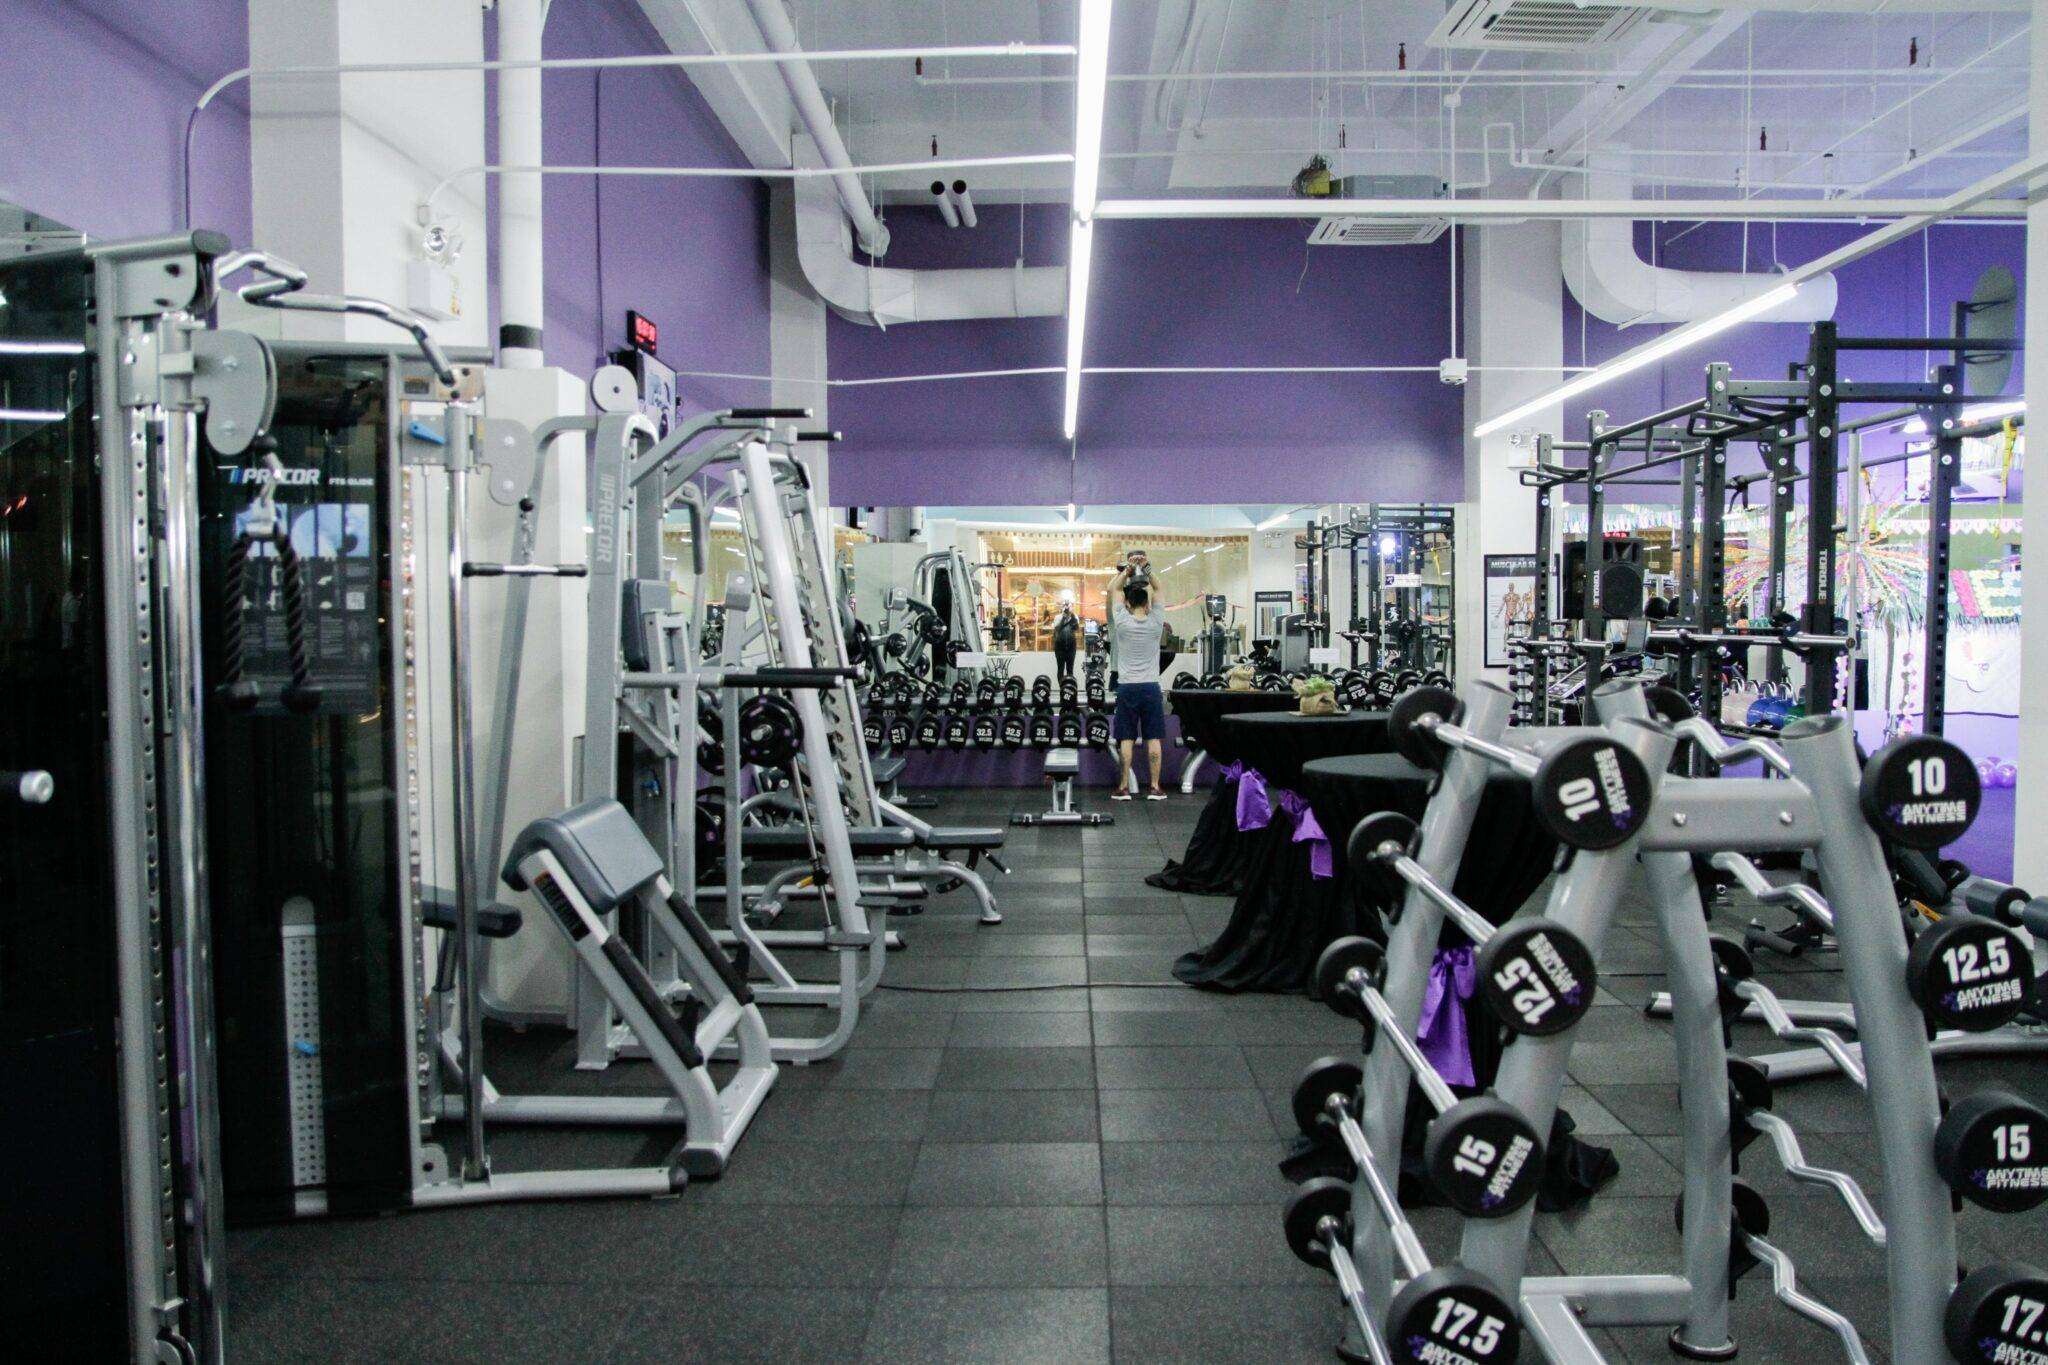 How To Cancel Anytime Fitness Membership